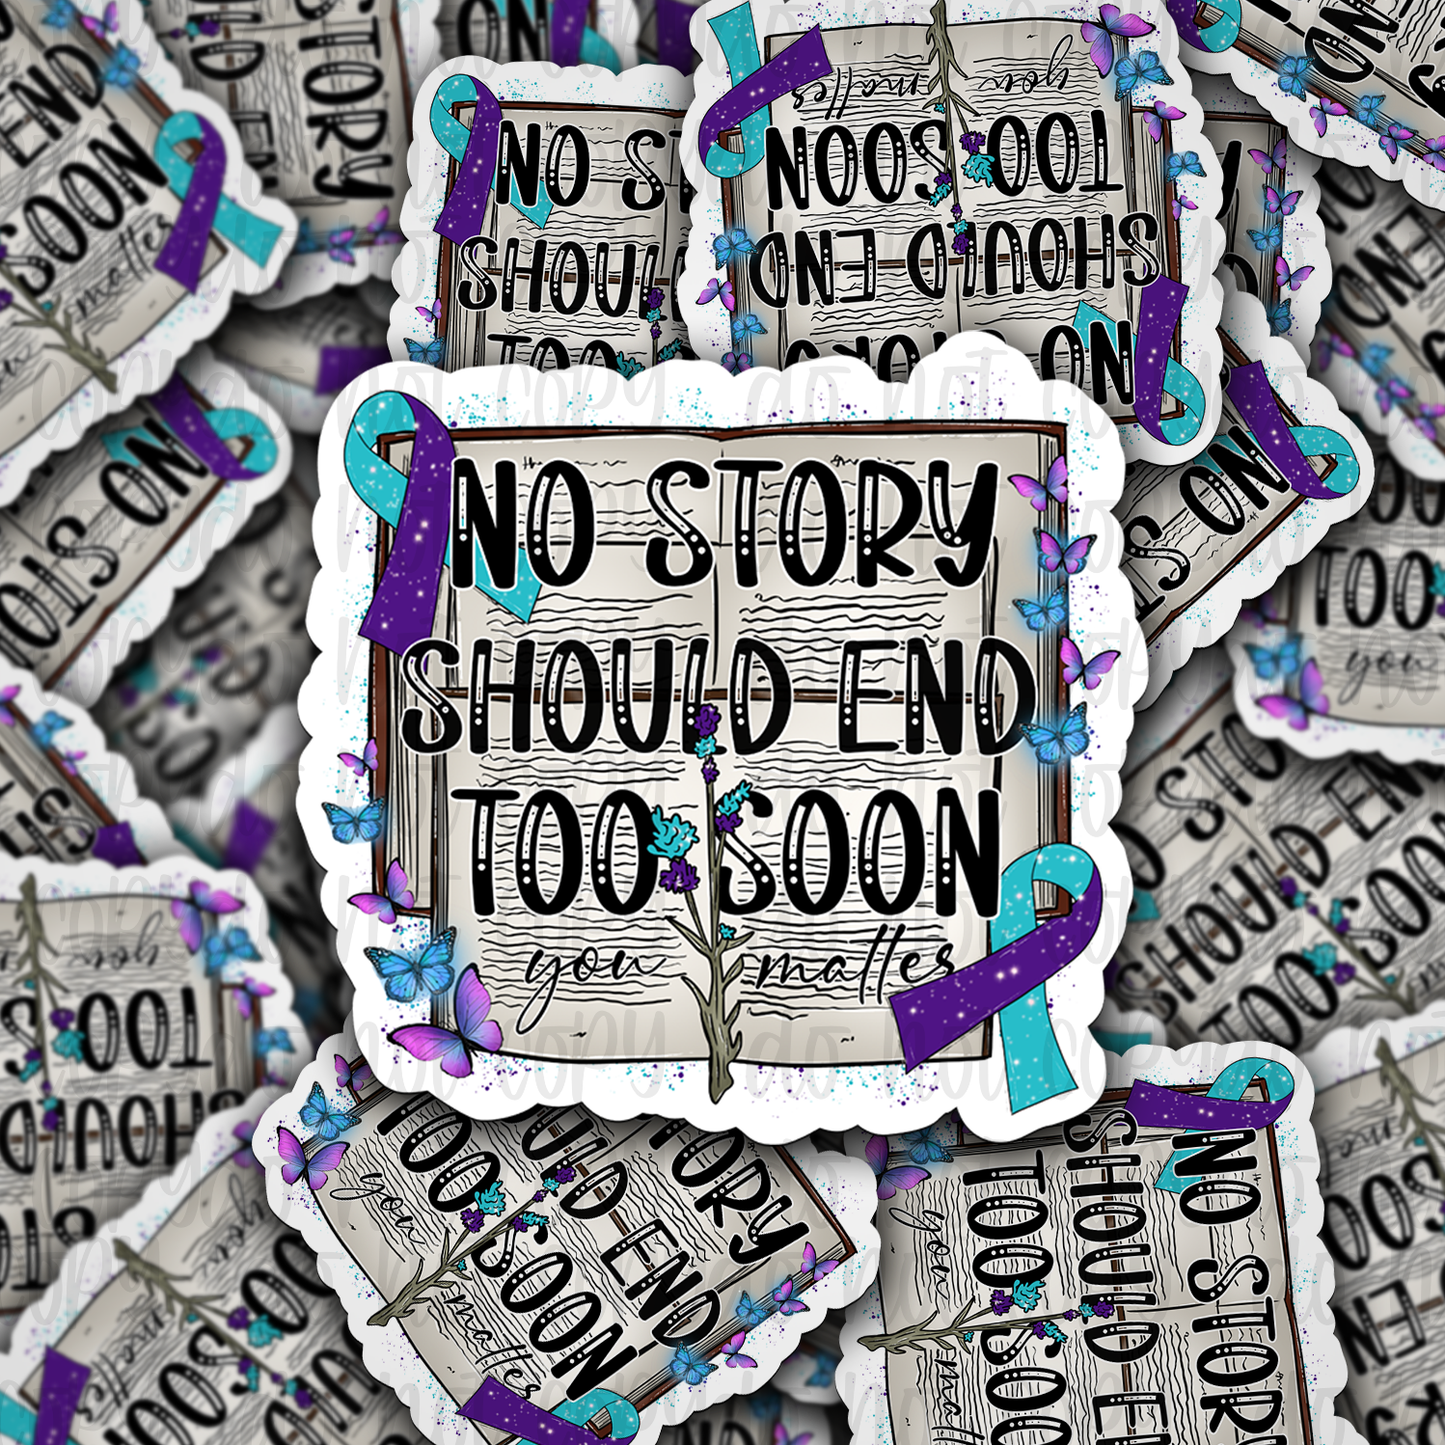 No story should end too soon you matter Die cut sticker 3-5 Business Day TAT